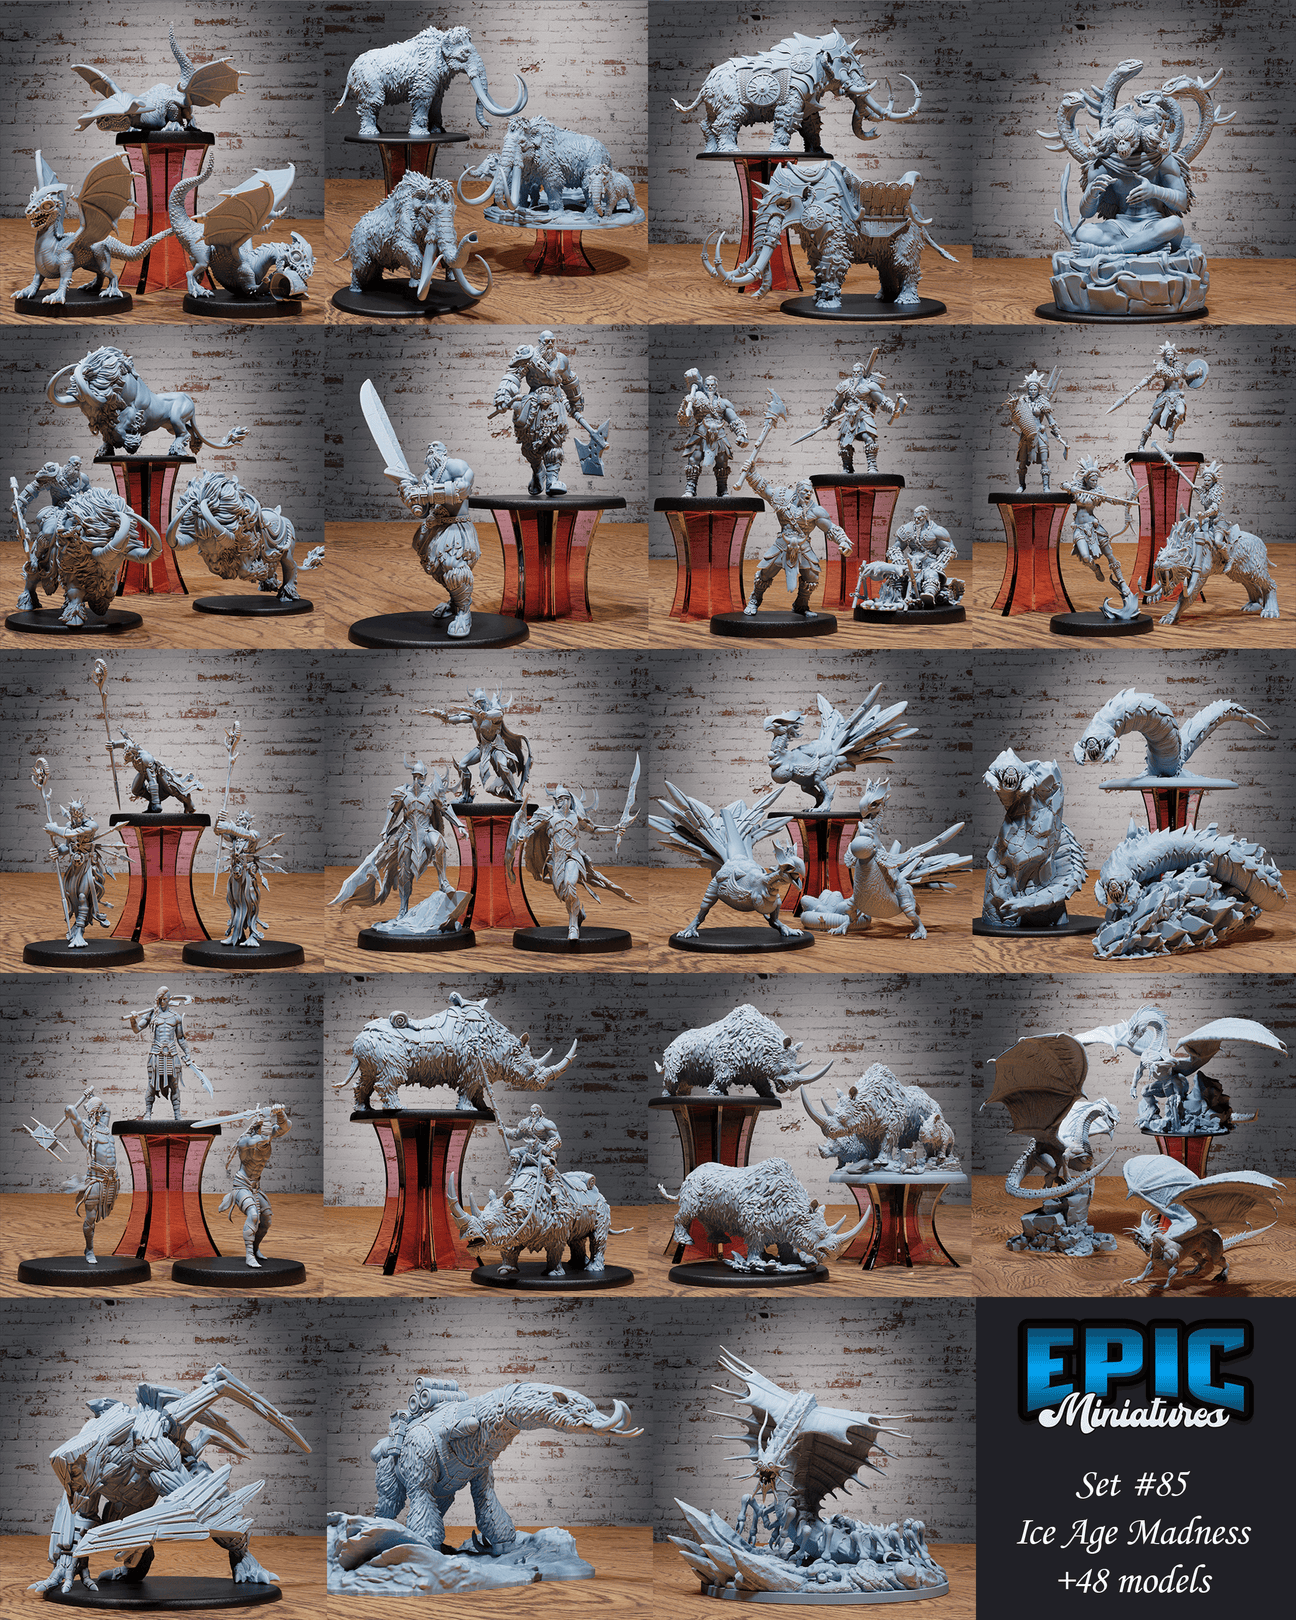 Tabletop Game - Ice Age Madness by EPIC Miniatures